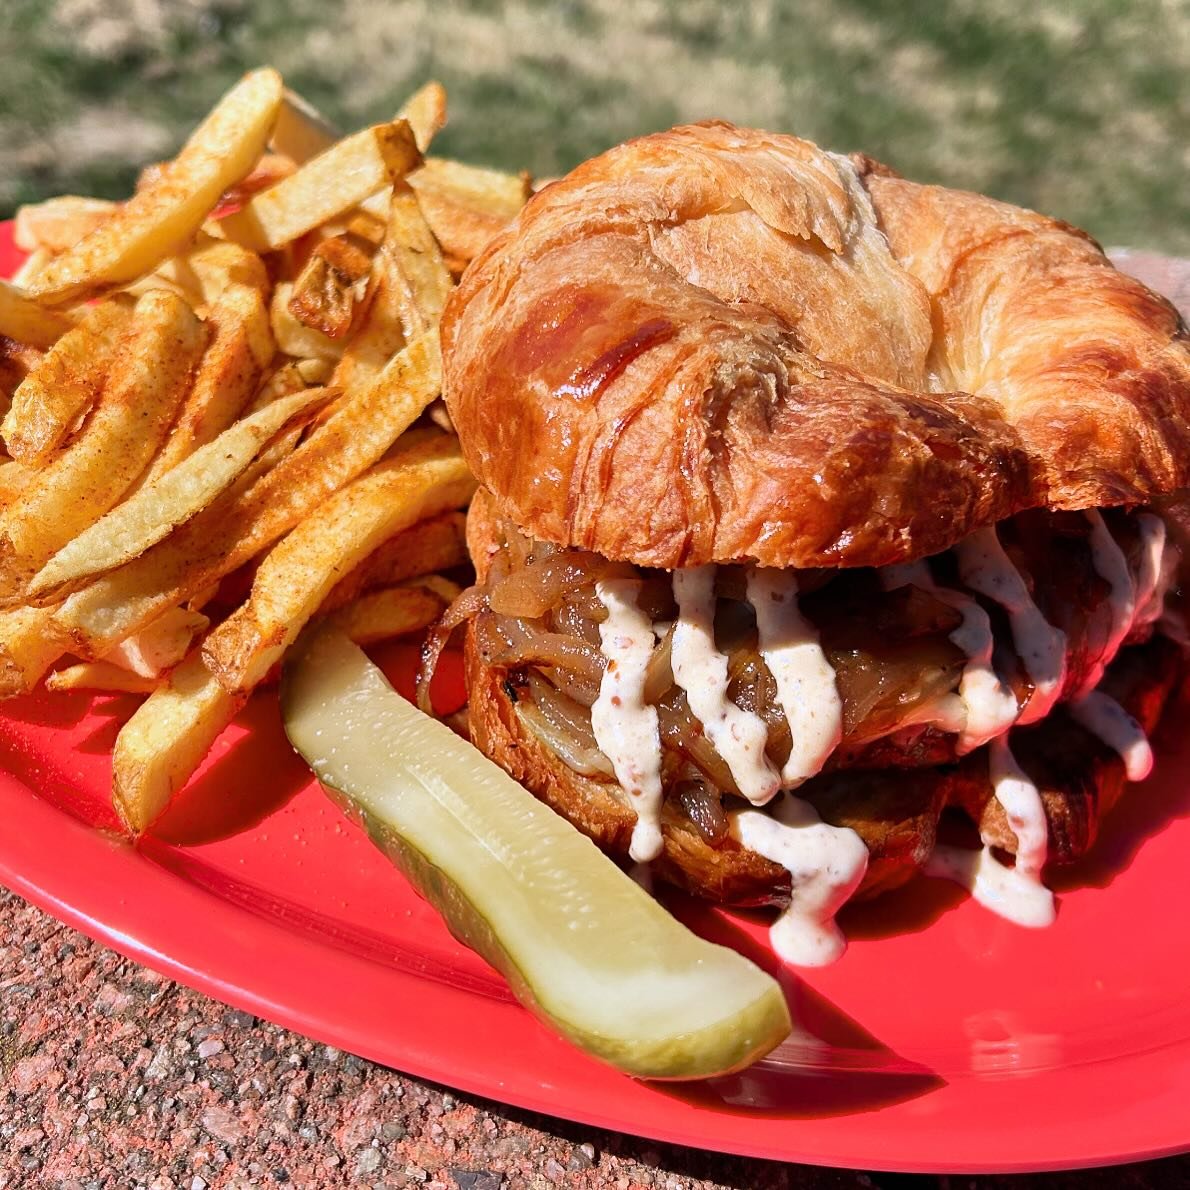 FRIDAY! You&rsquo;ll always have Paris this weekend at Root Down Market with our French Onion Burger 🇫🇷 served on a garlic butter-toasted croissant 🥐 with @colbywoods beef patty topped w/ melted @pinelandfarmsdairy baby Swiss cheese, caramelized o